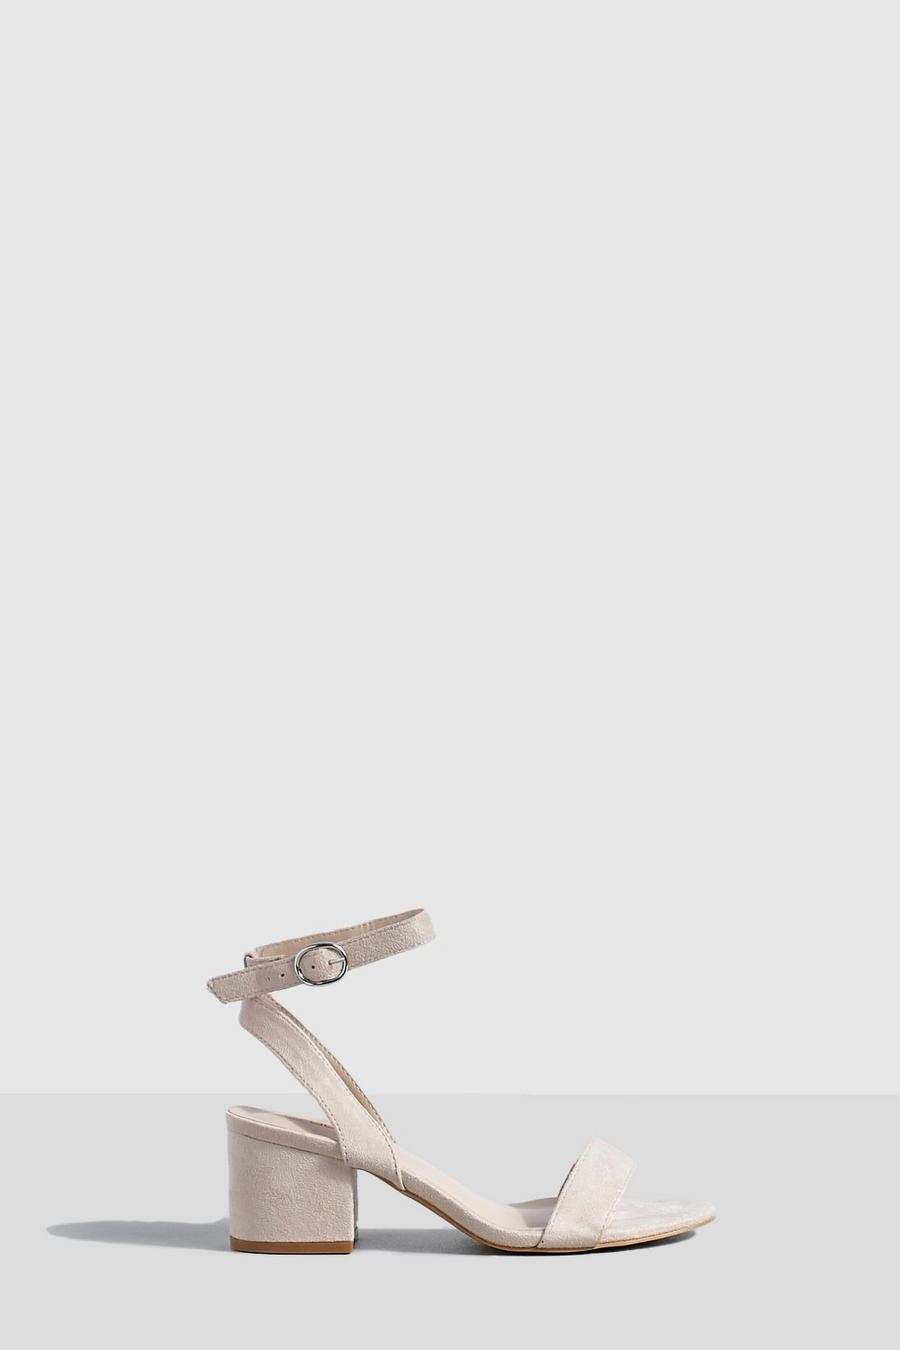 Blush Low Block Barely There Heels 